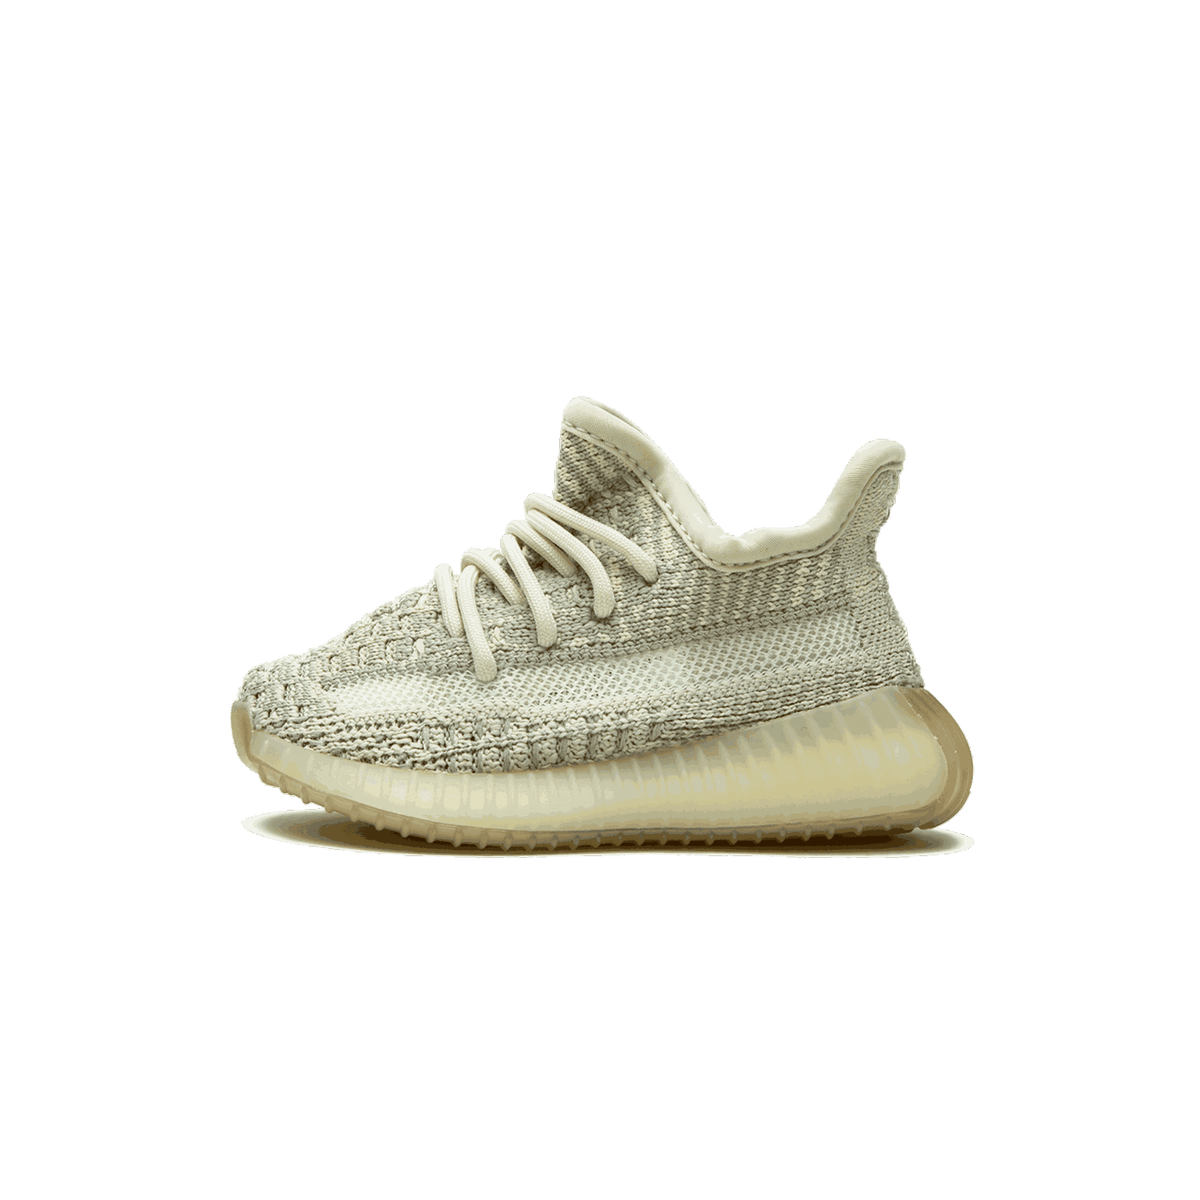 Adidas Yeezy Boost 350 V2 Infant 'Citrin Non-Reflective' - CerbeShops